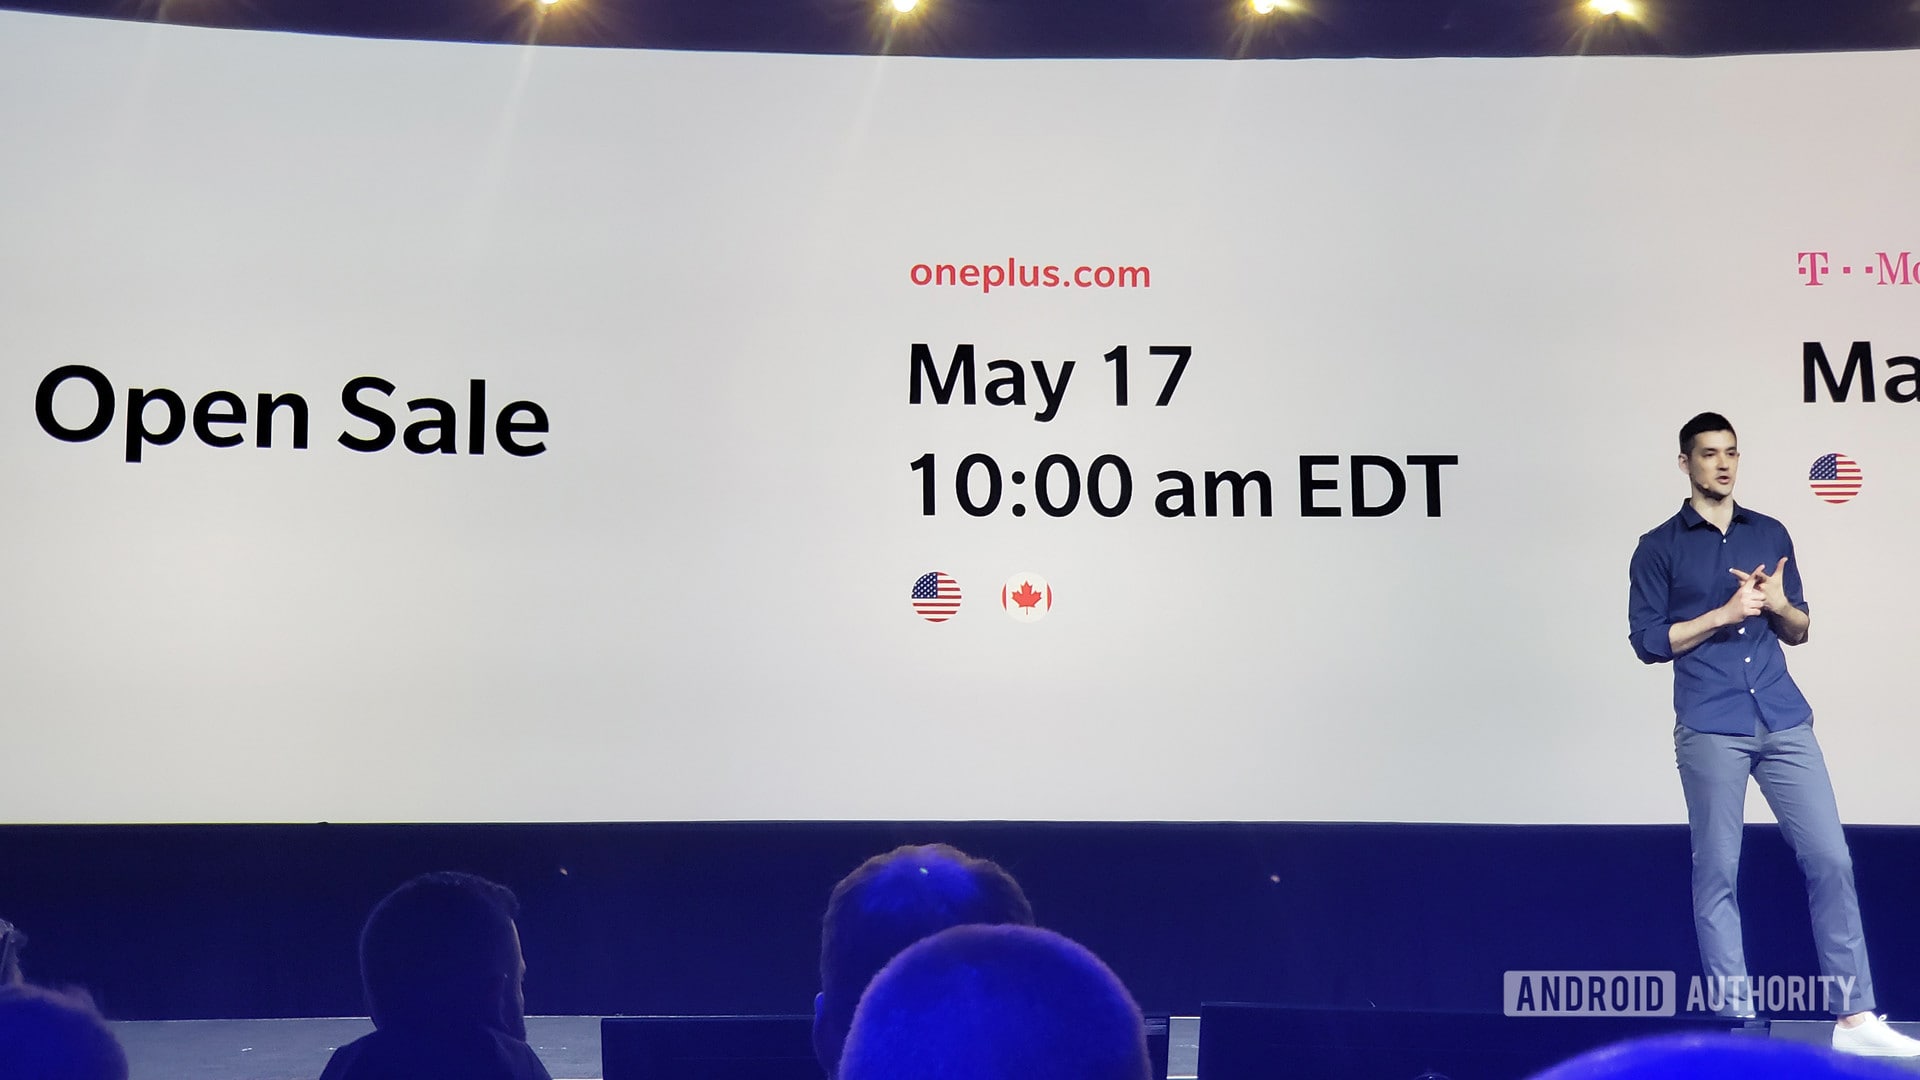 oneplus 7 pro price and release date on stage